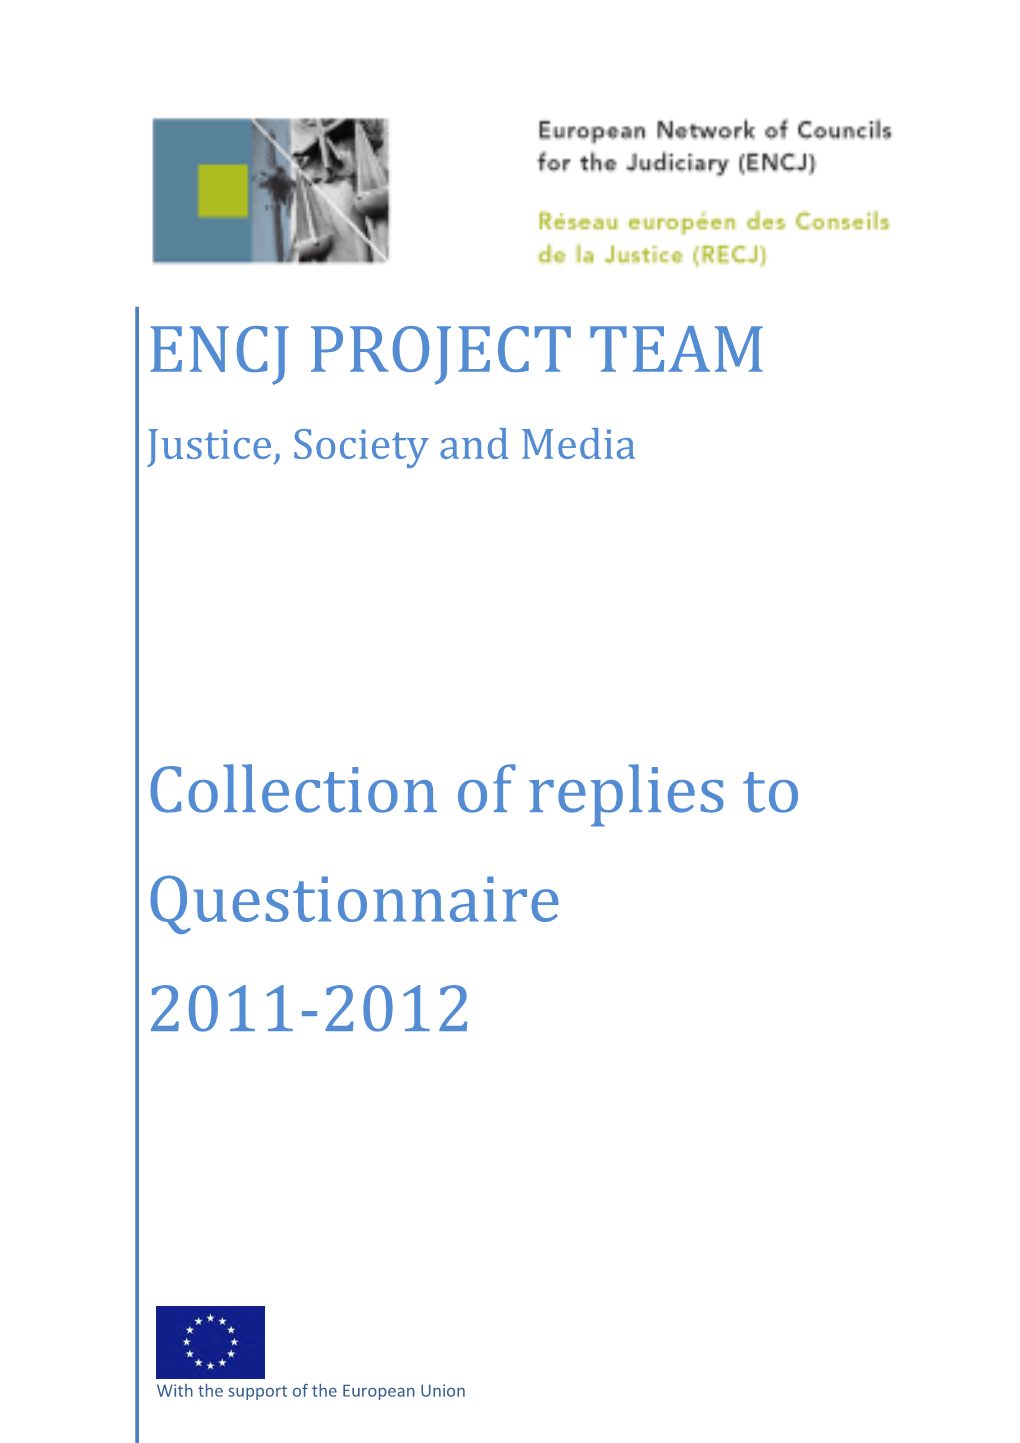 ENCJ PROJECT TEAM Collection of Replies to Questionnaire 2011-2012